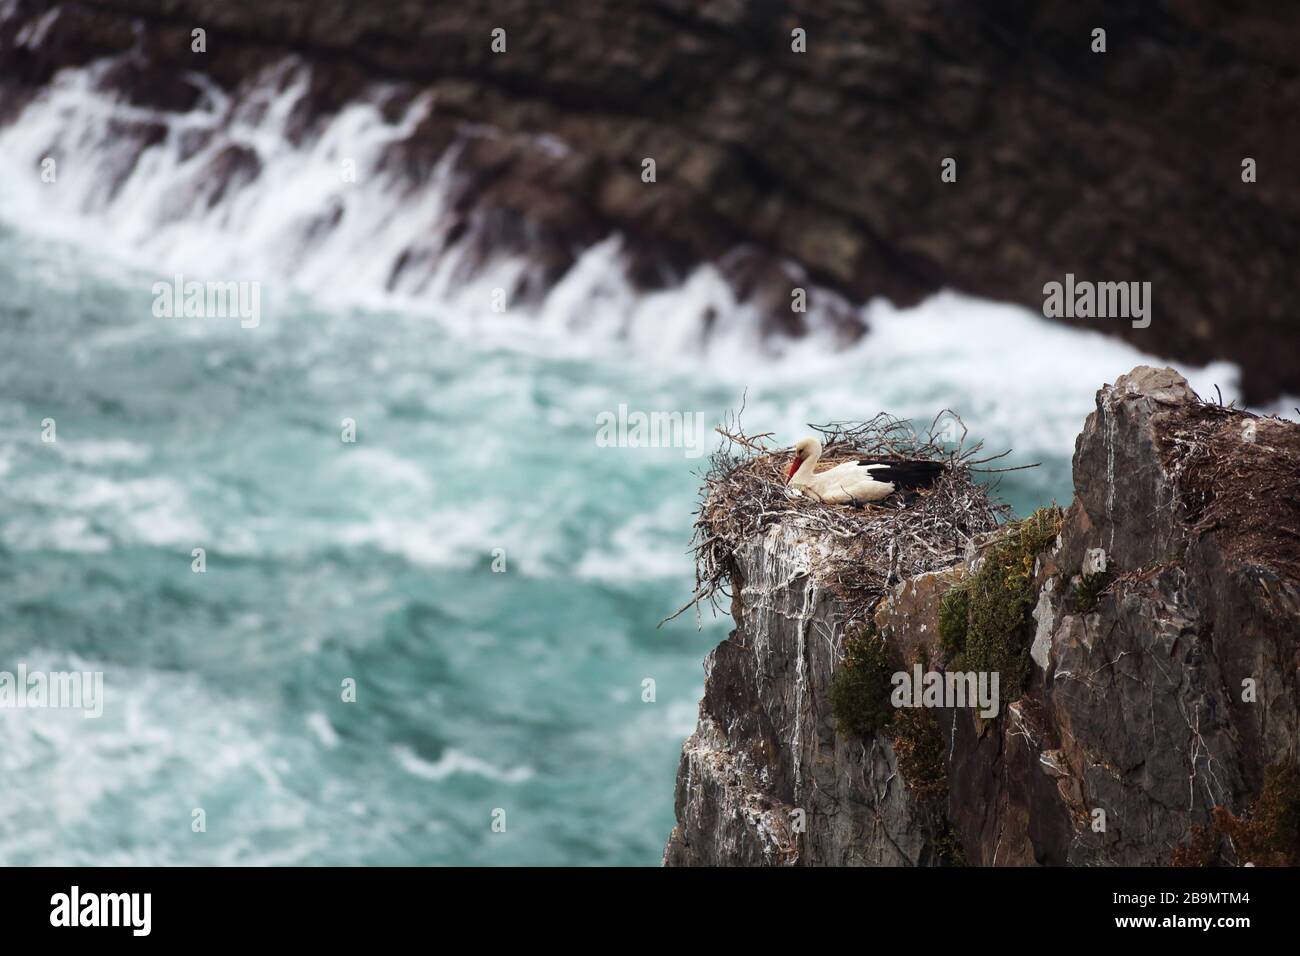 A white stork resting on her nest perched on a rocky cliff by the sea, the Atlantic Ocean, near Cabo Sardão, Portugal. Stock Photo